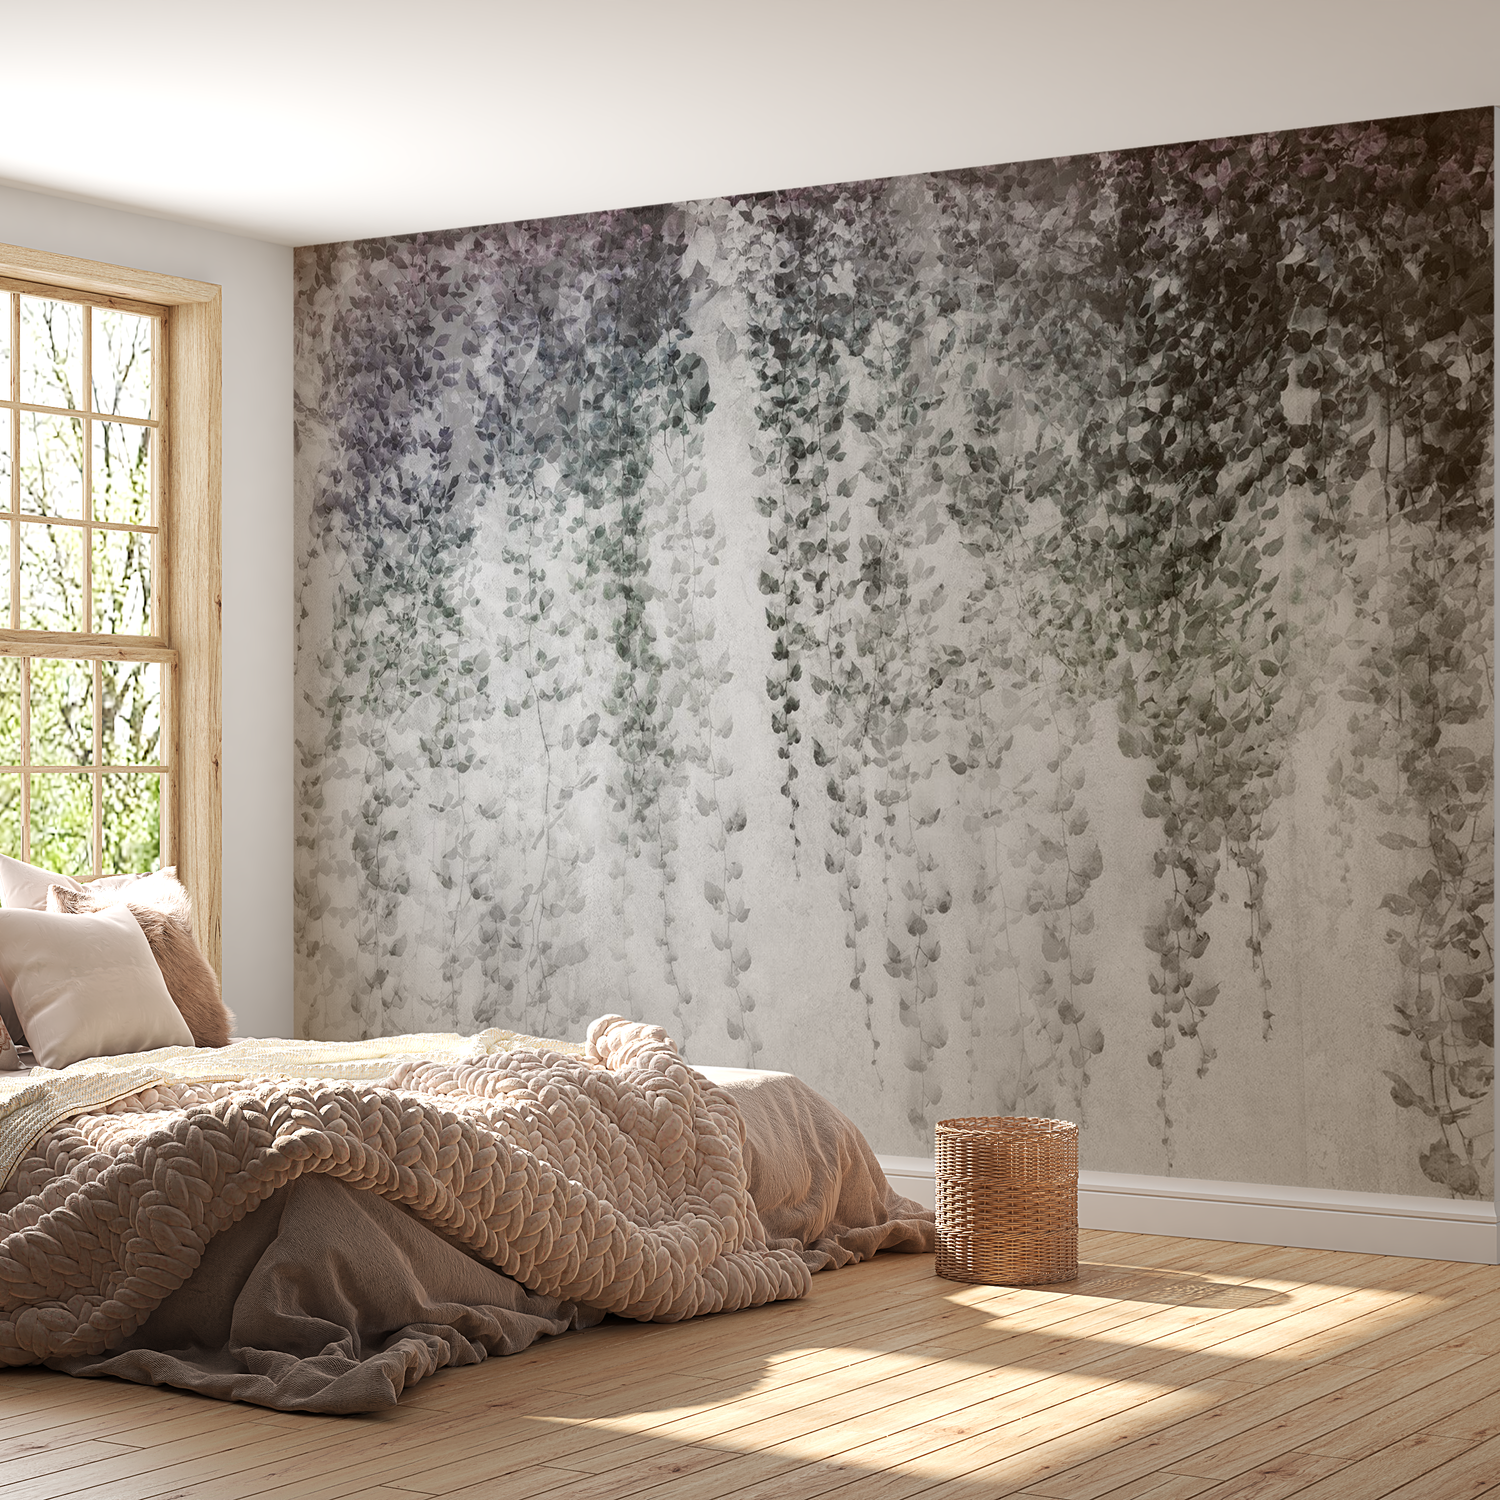 Peel & Stick Botanical Wall Mural - Peaceful Grey Oasis - Removable Wallpaper 38"Wx27"H